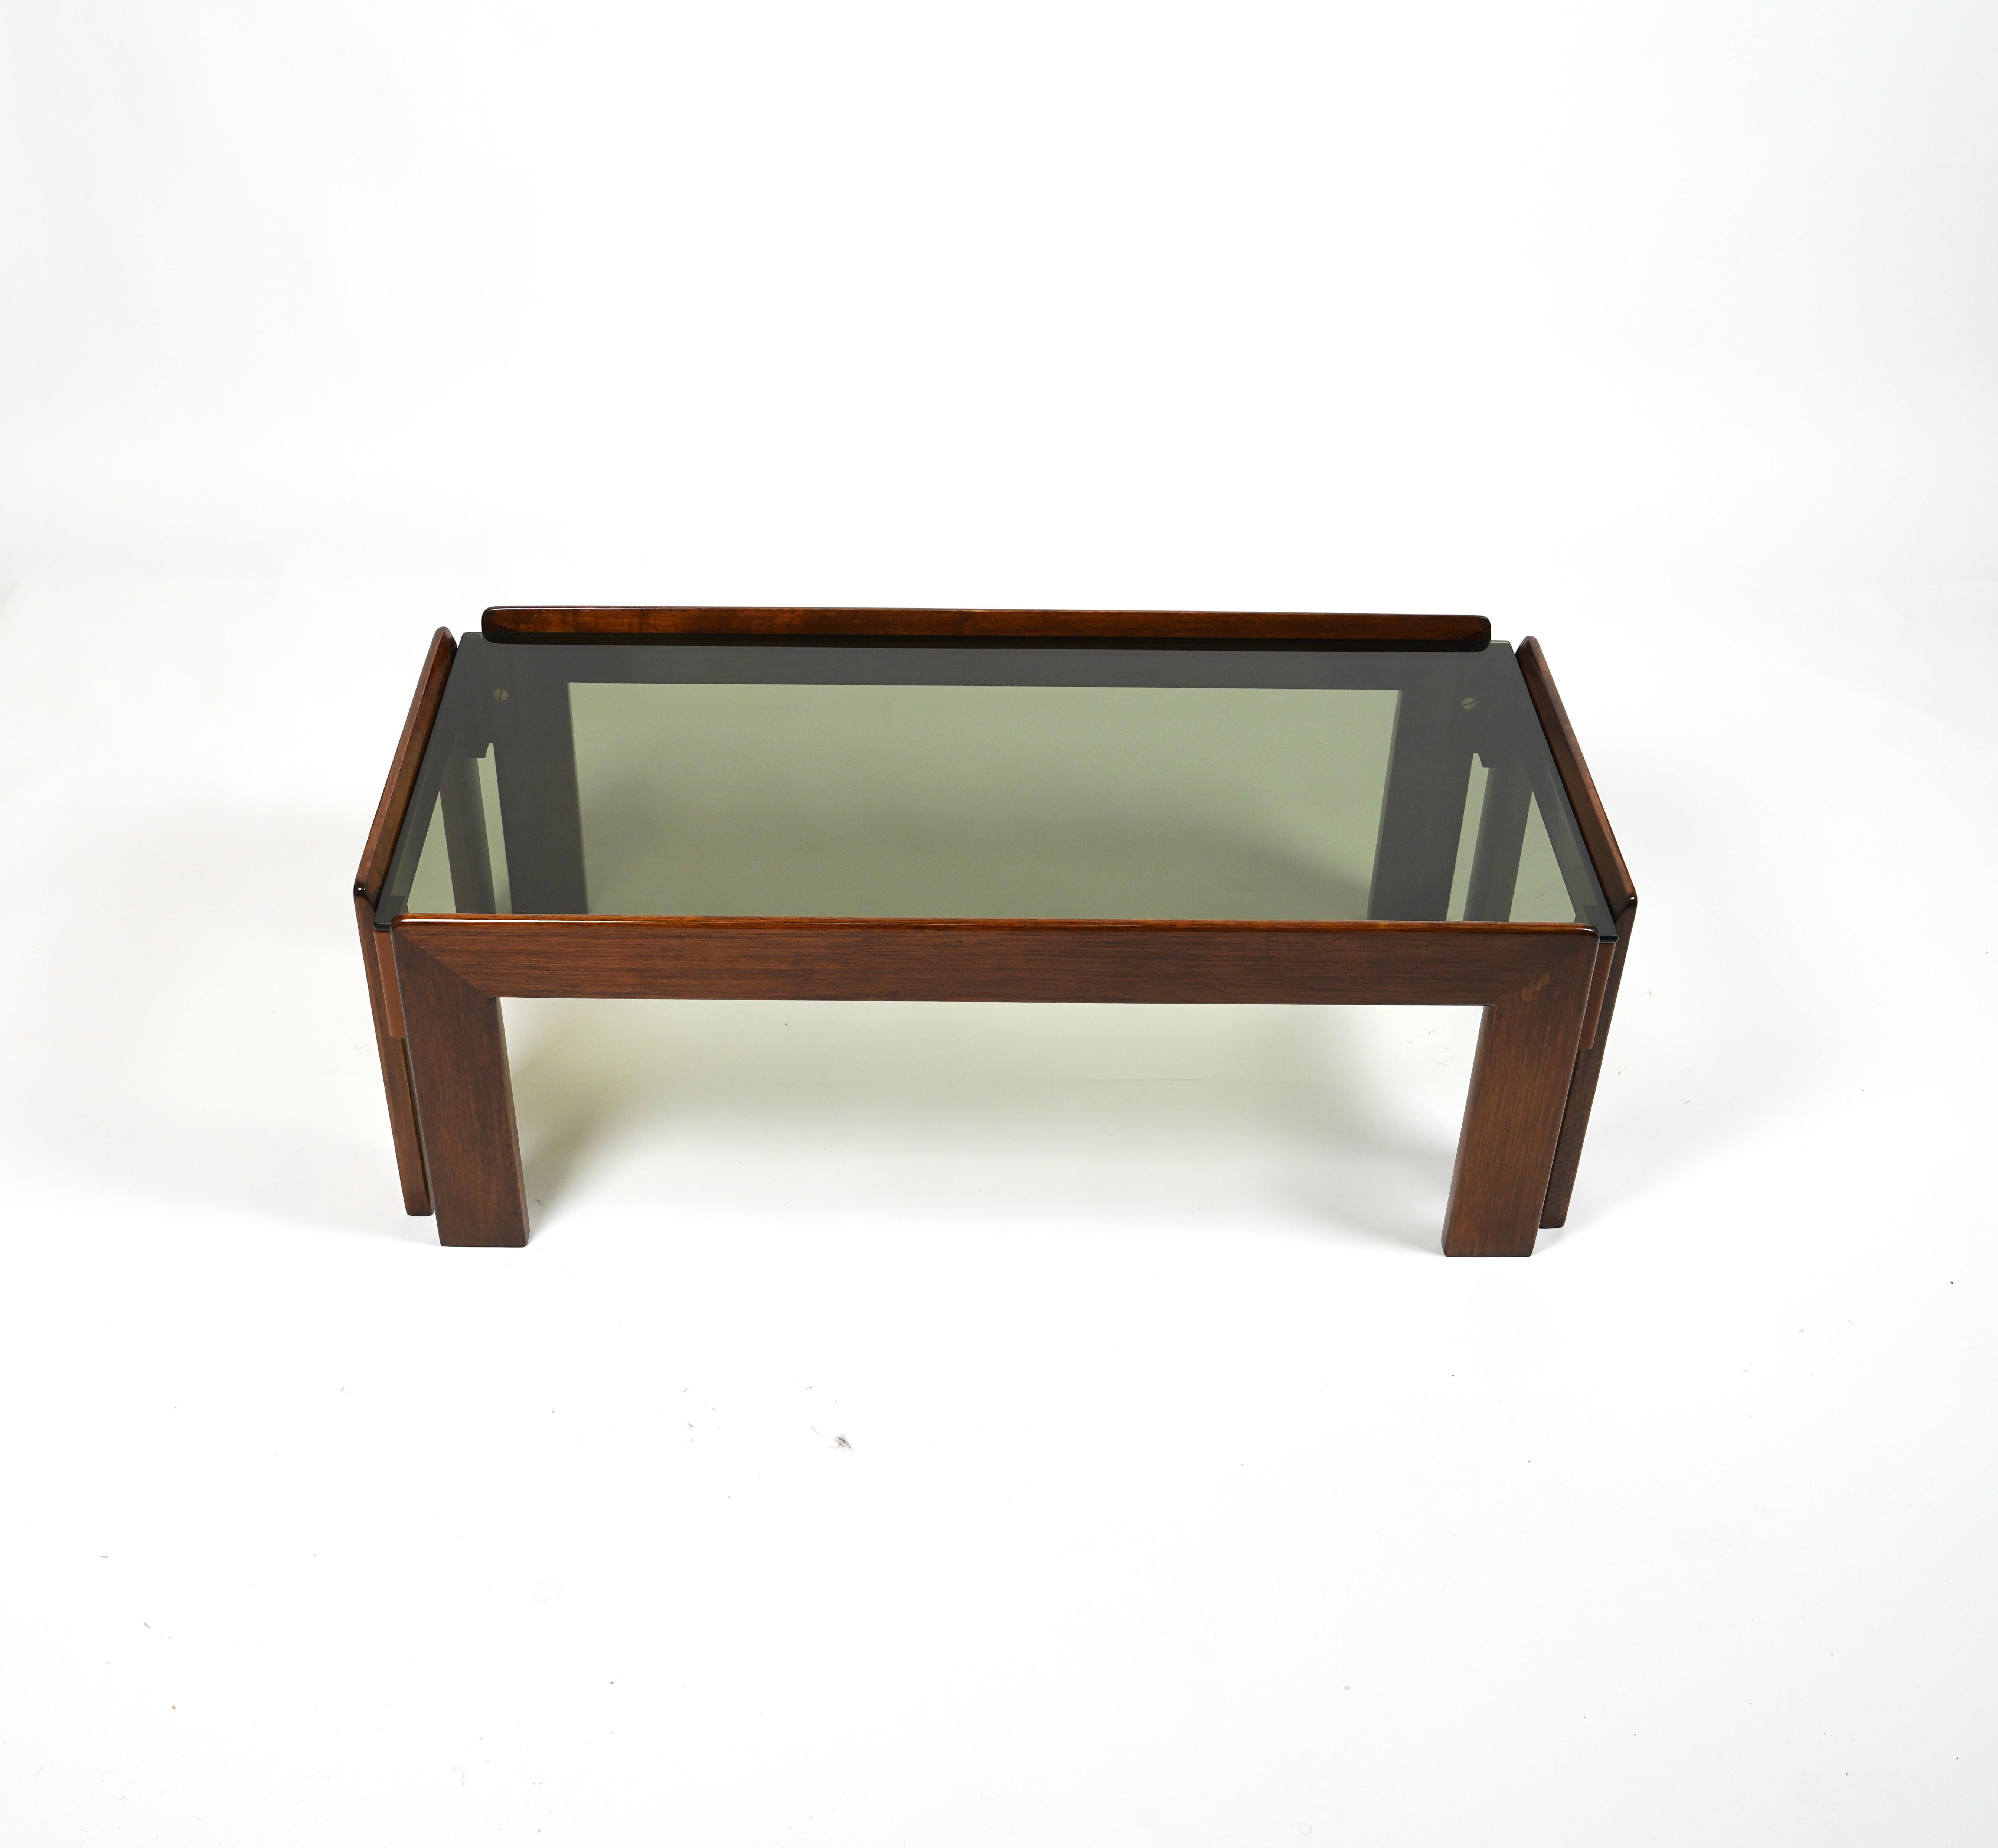 Mid-20th Century Coffee Table in Wood and Glass Afra & Tobia Scarpa for Cassina, Italy 1960s For Sale